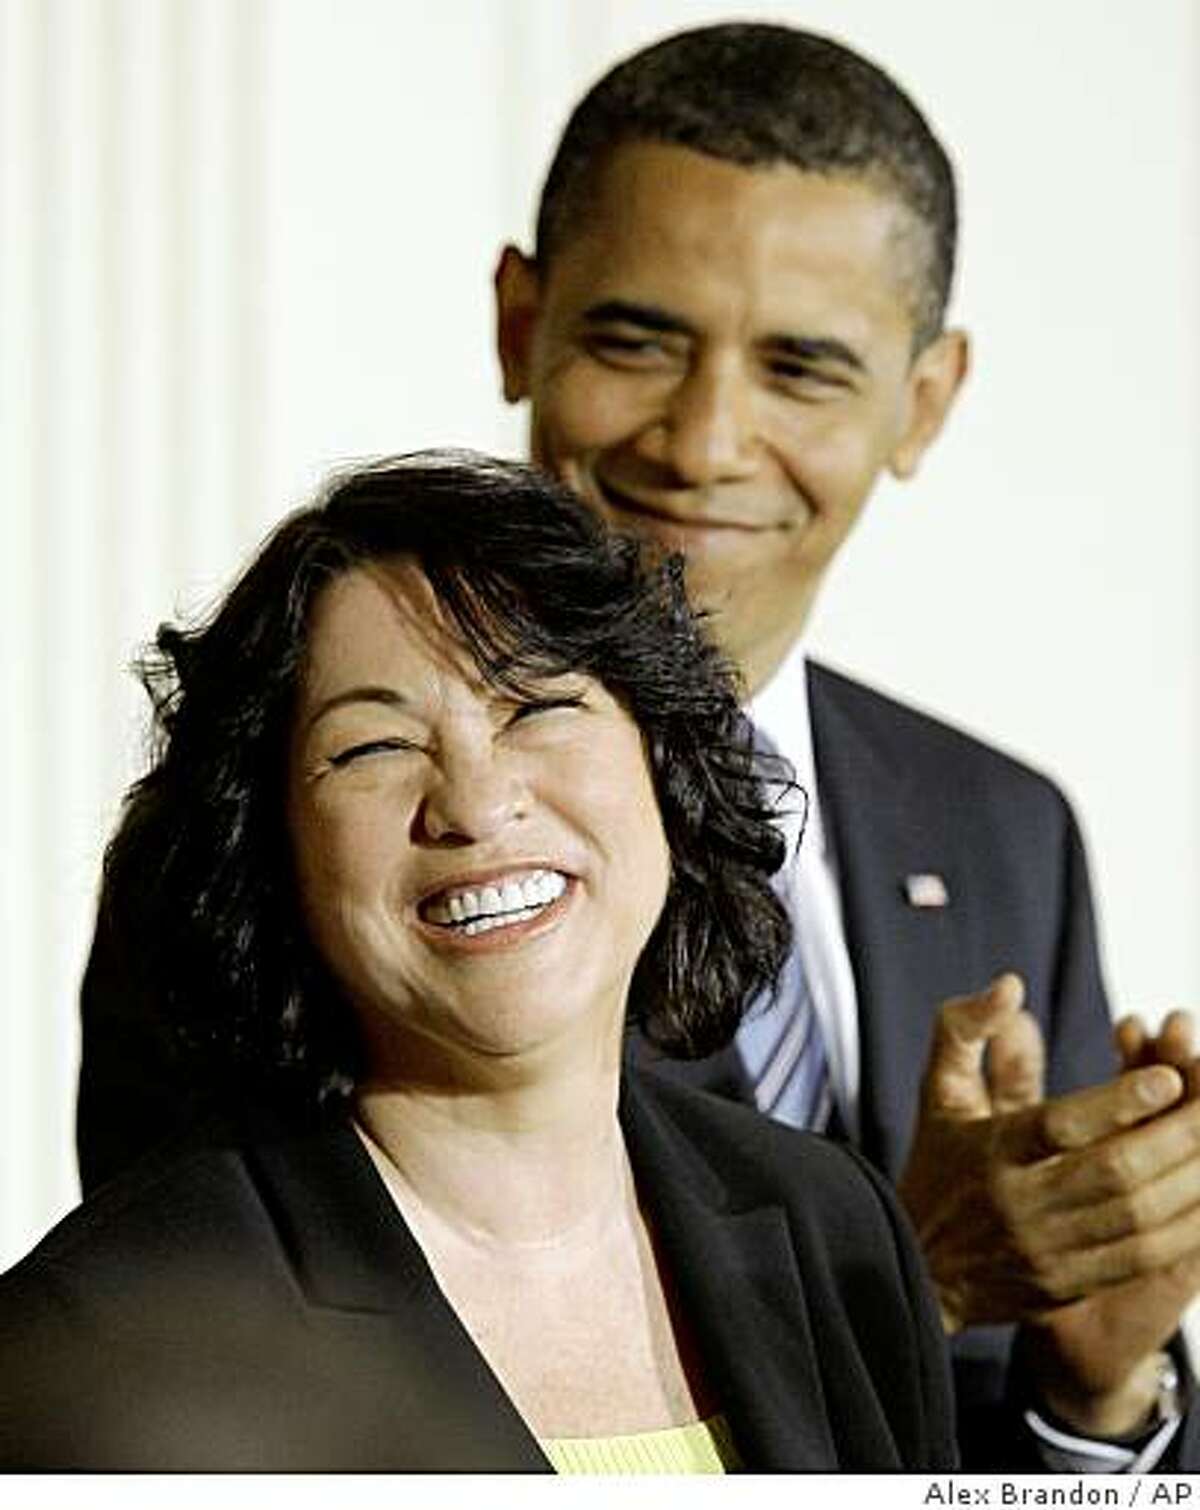 Supreme Court nominee Judge Sonia Sotomayor smiles as President Barack Obama applauds, Tuesday, May 26, 2009,in the East Room Ceremony of the White House in Washington. (AP Photo/Alex Brandon)